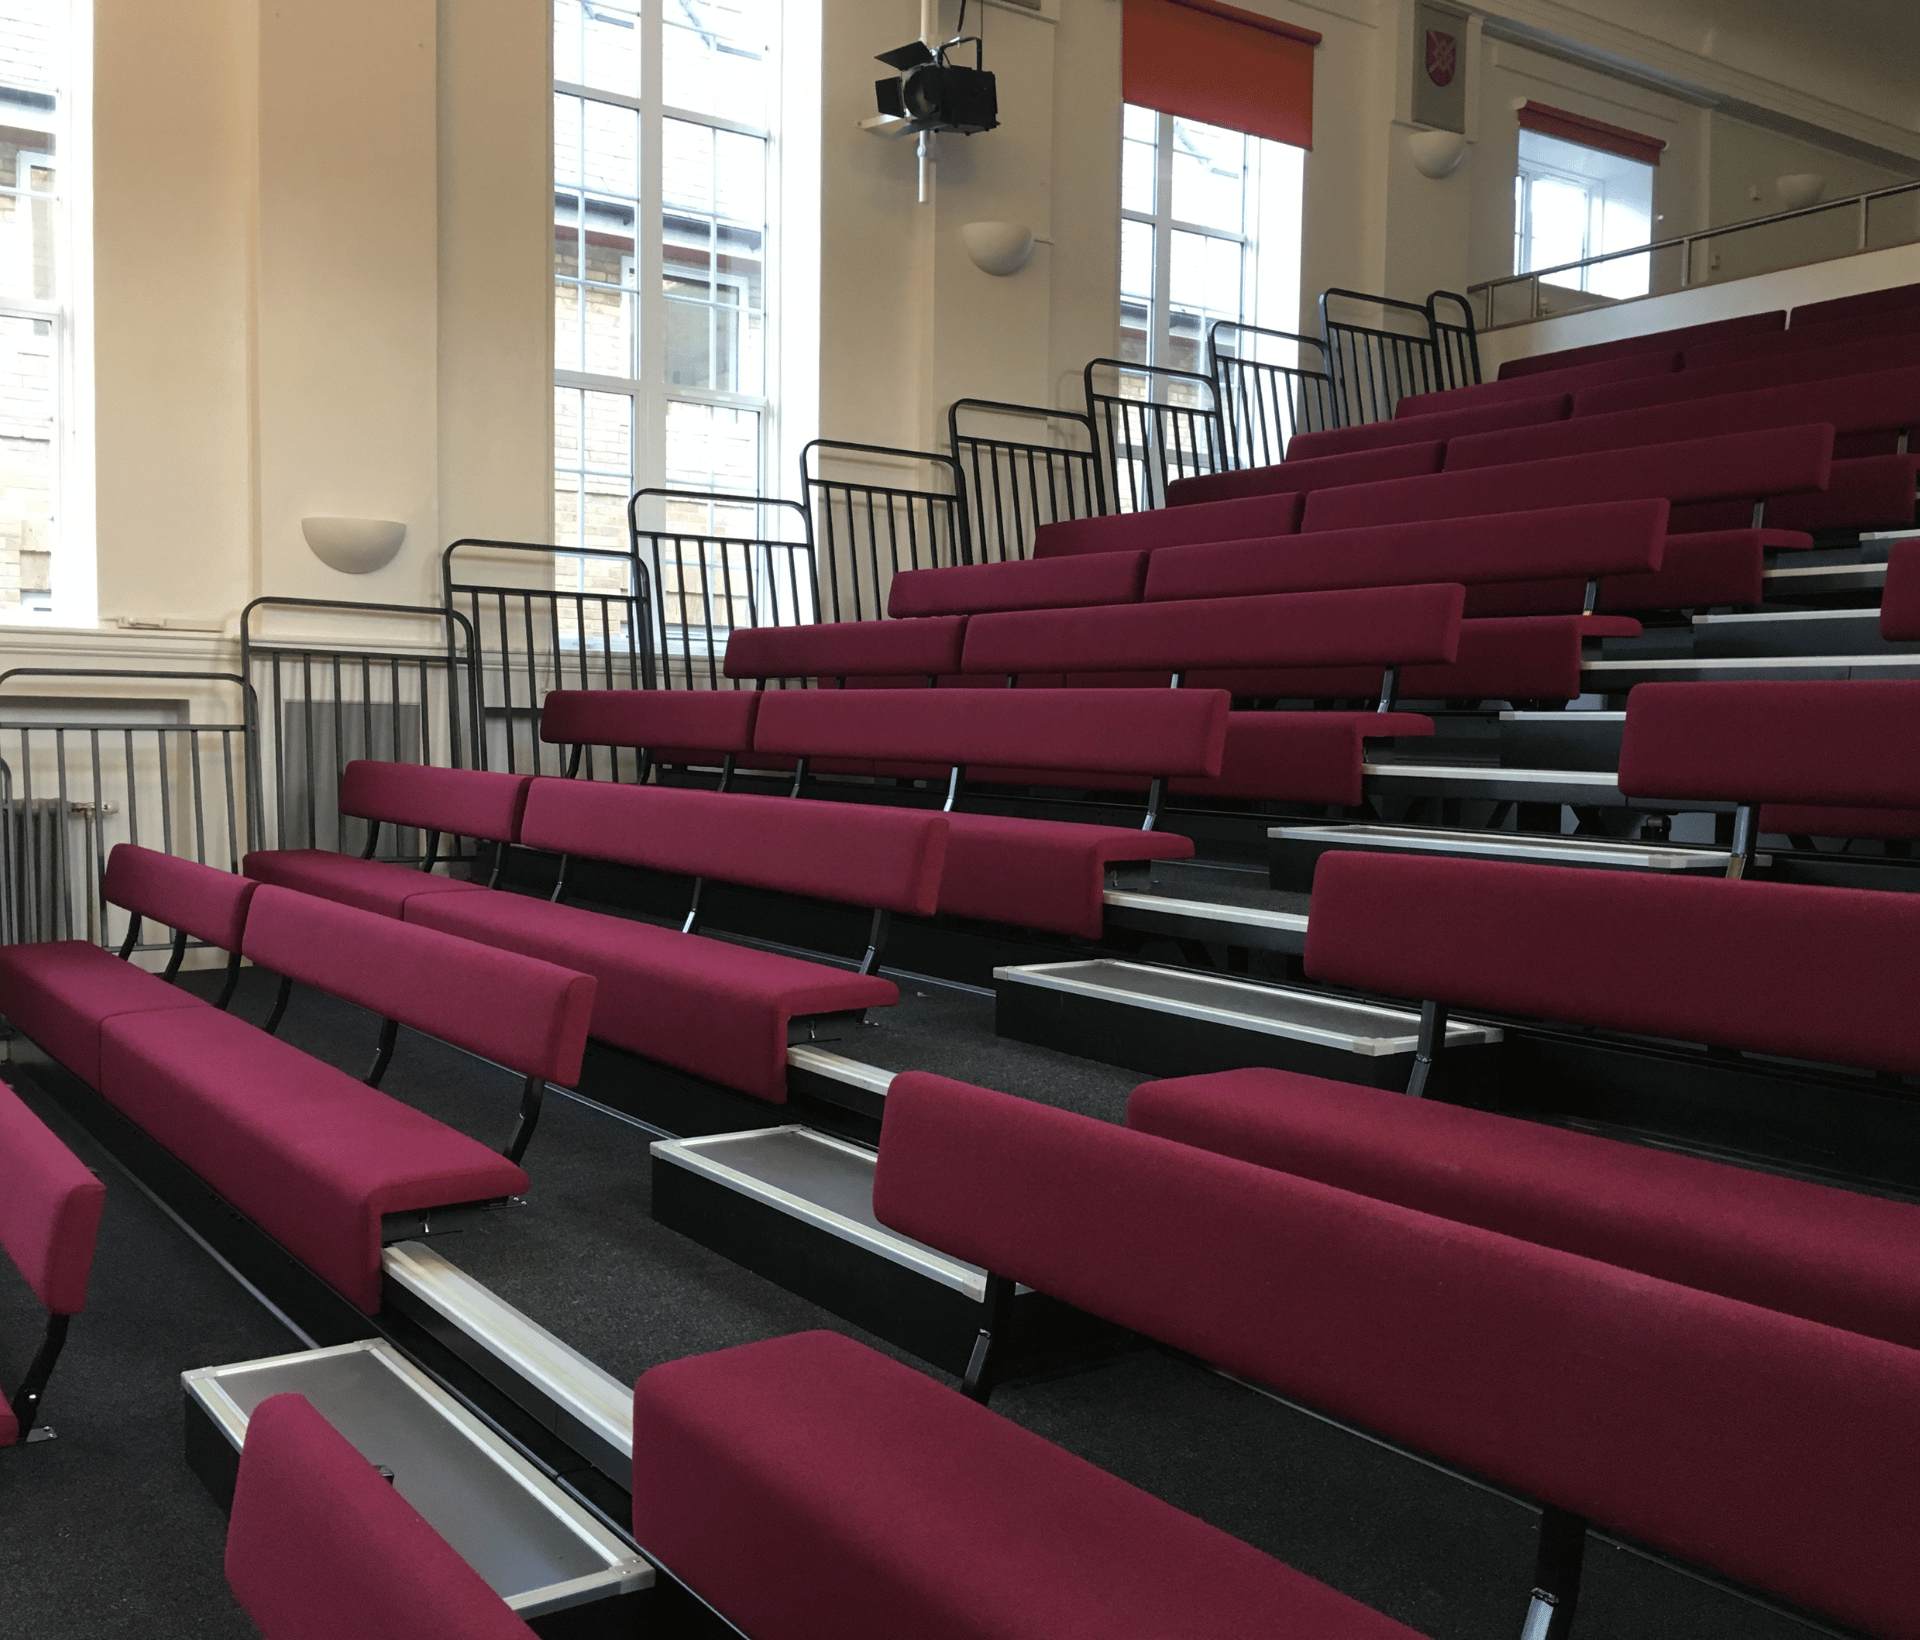 A row of bench seating in a large auditorium.